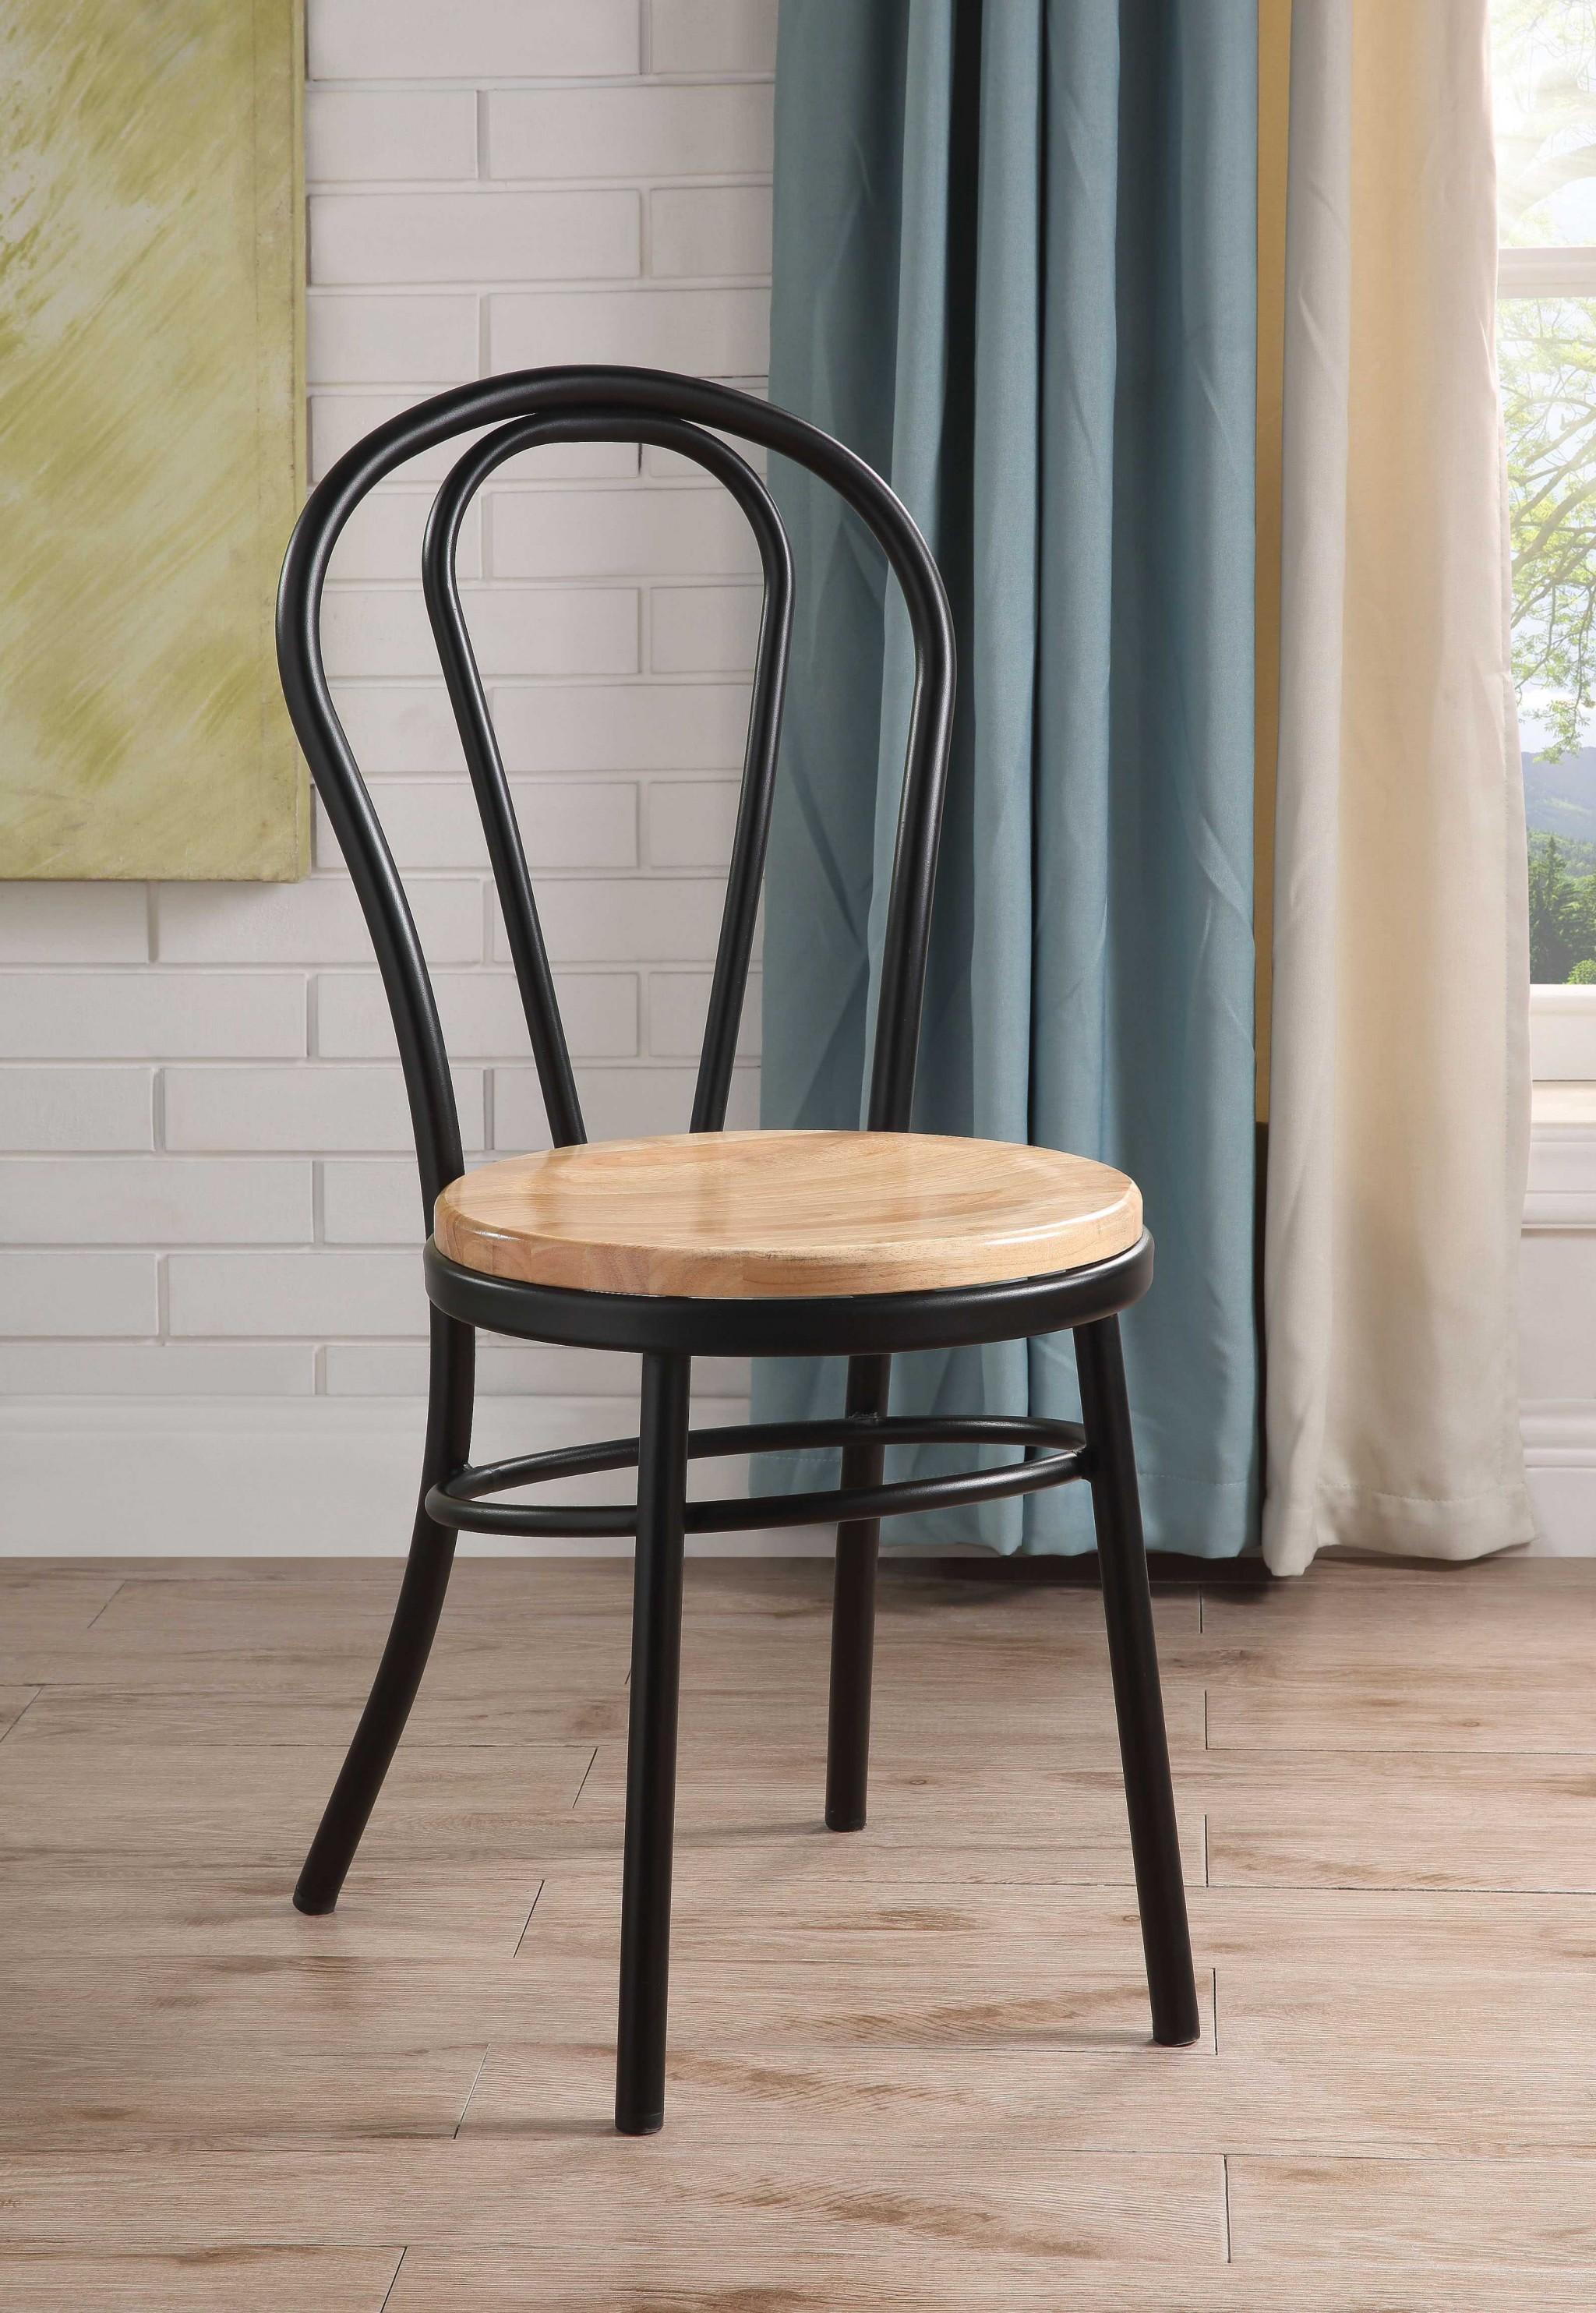 Set of 2 Restaurant Style Arch Back Black and Natural Dining Chairs